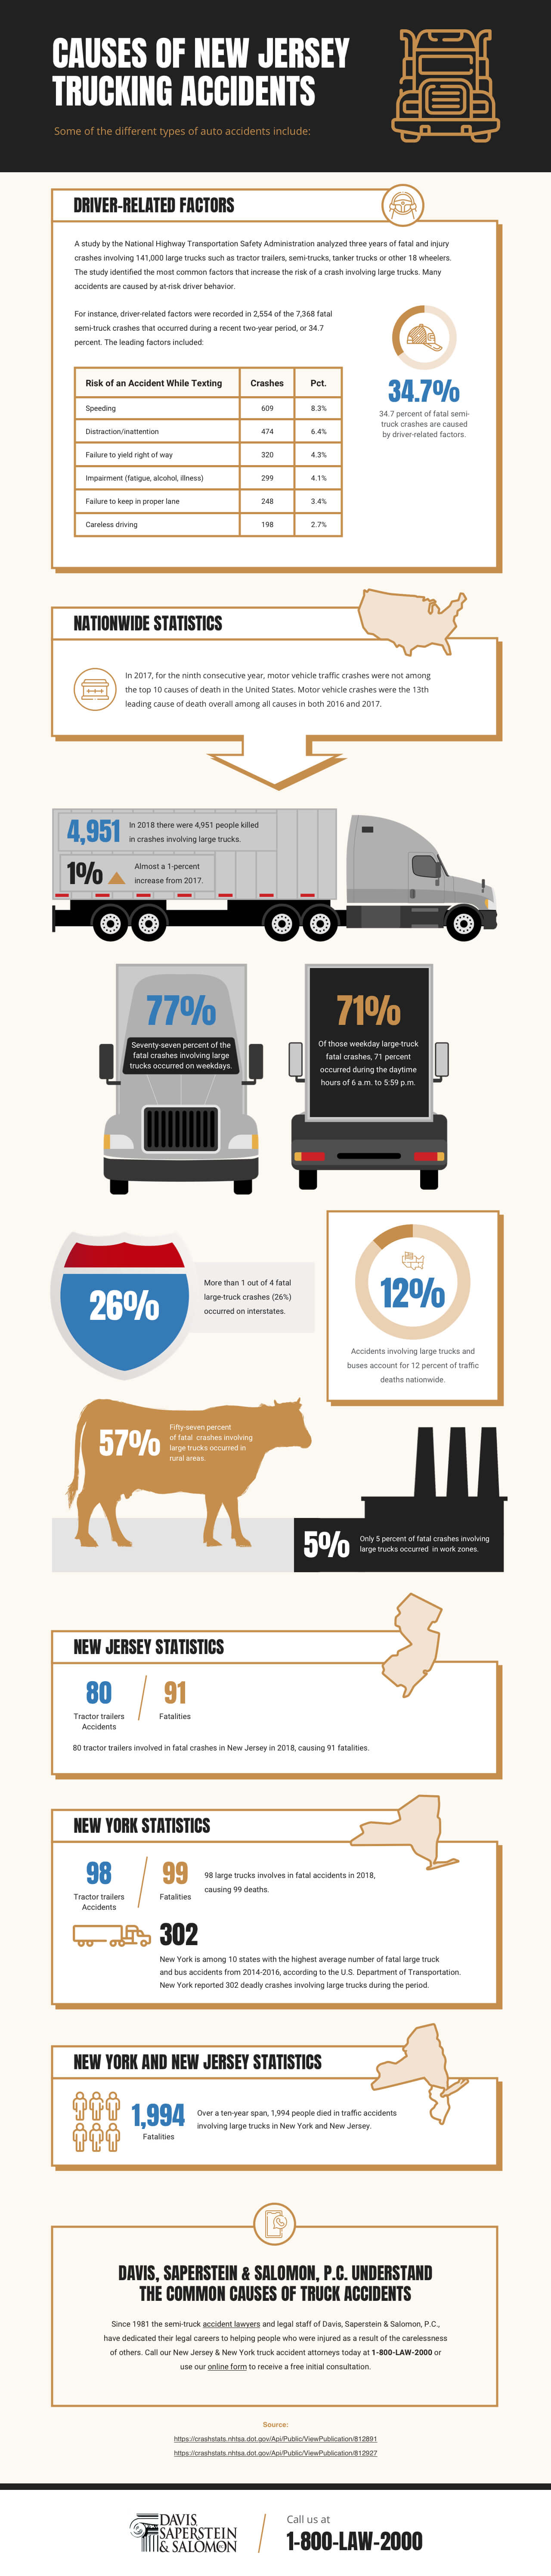 Graphics - Causes of New Jersey Trucking Accidents